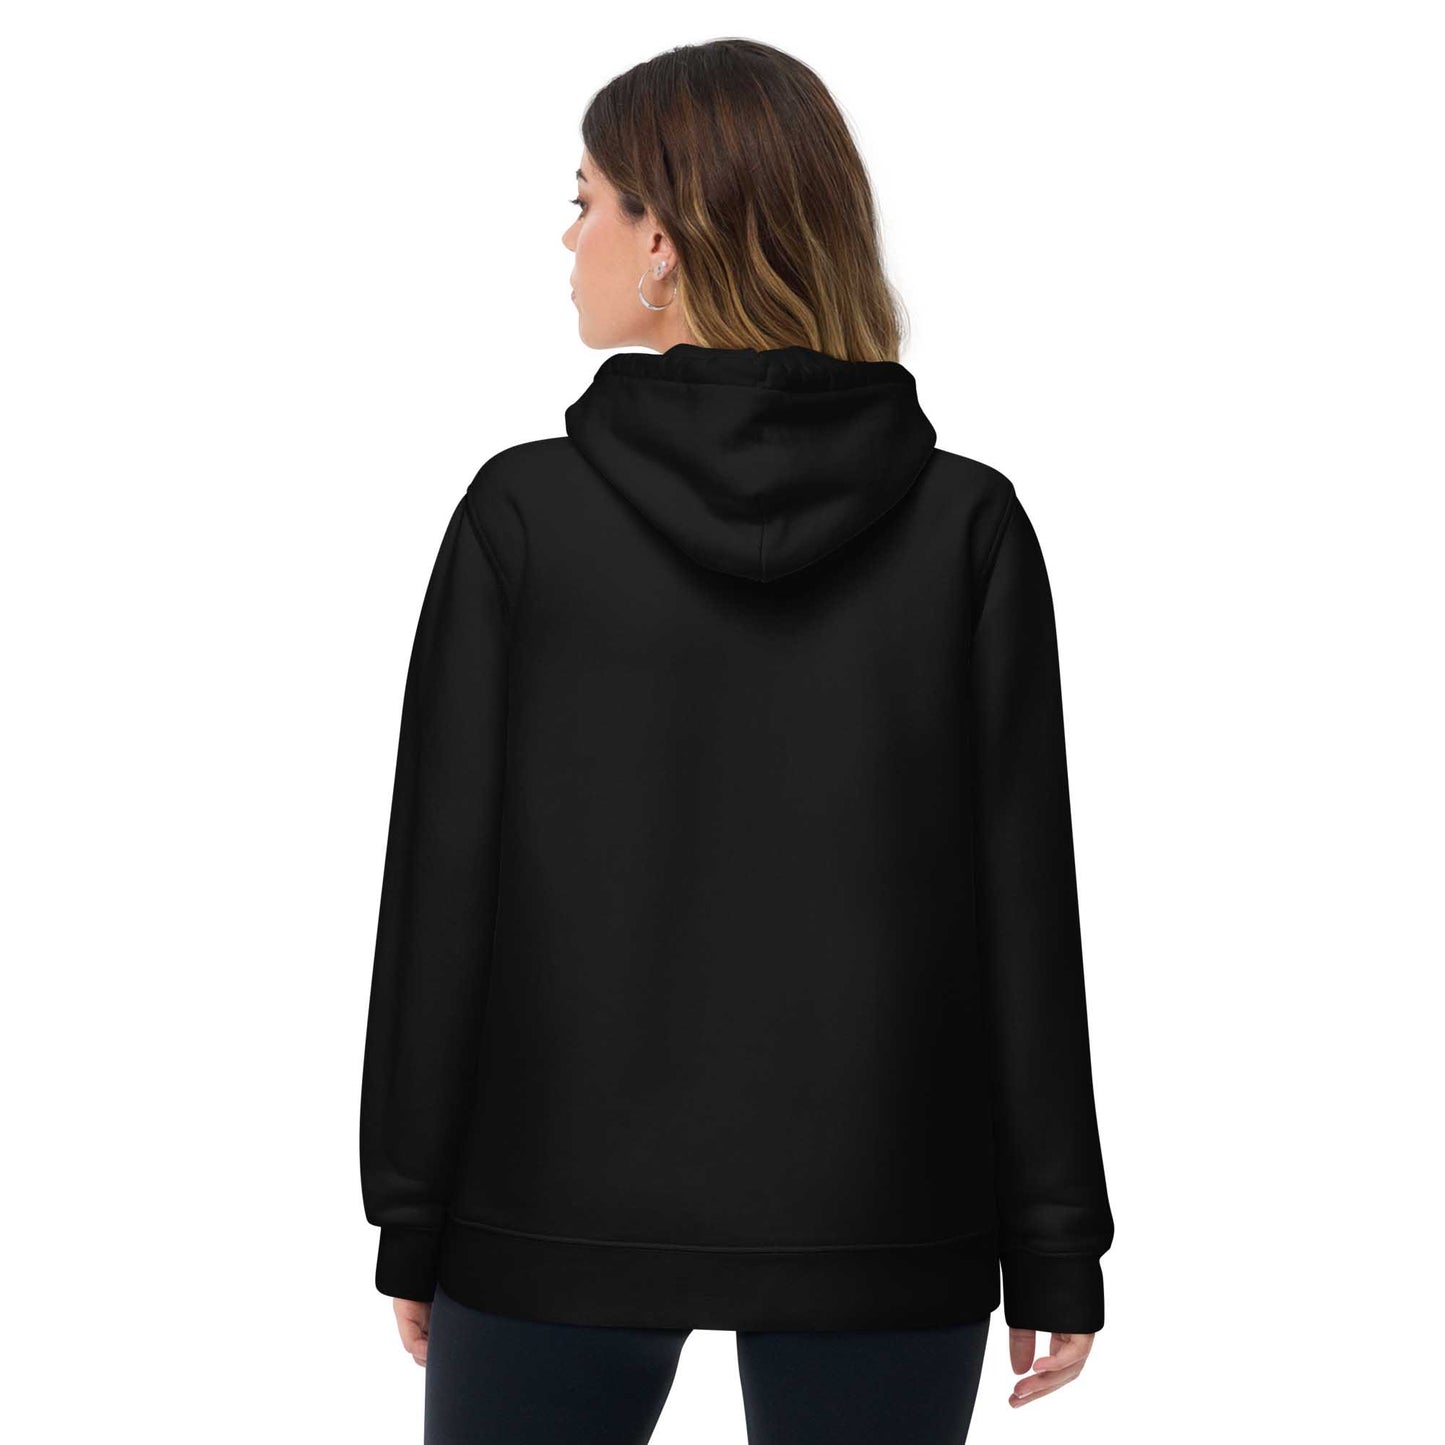 Women black motivational hoodie with inspirational quote, "Yes You Can."